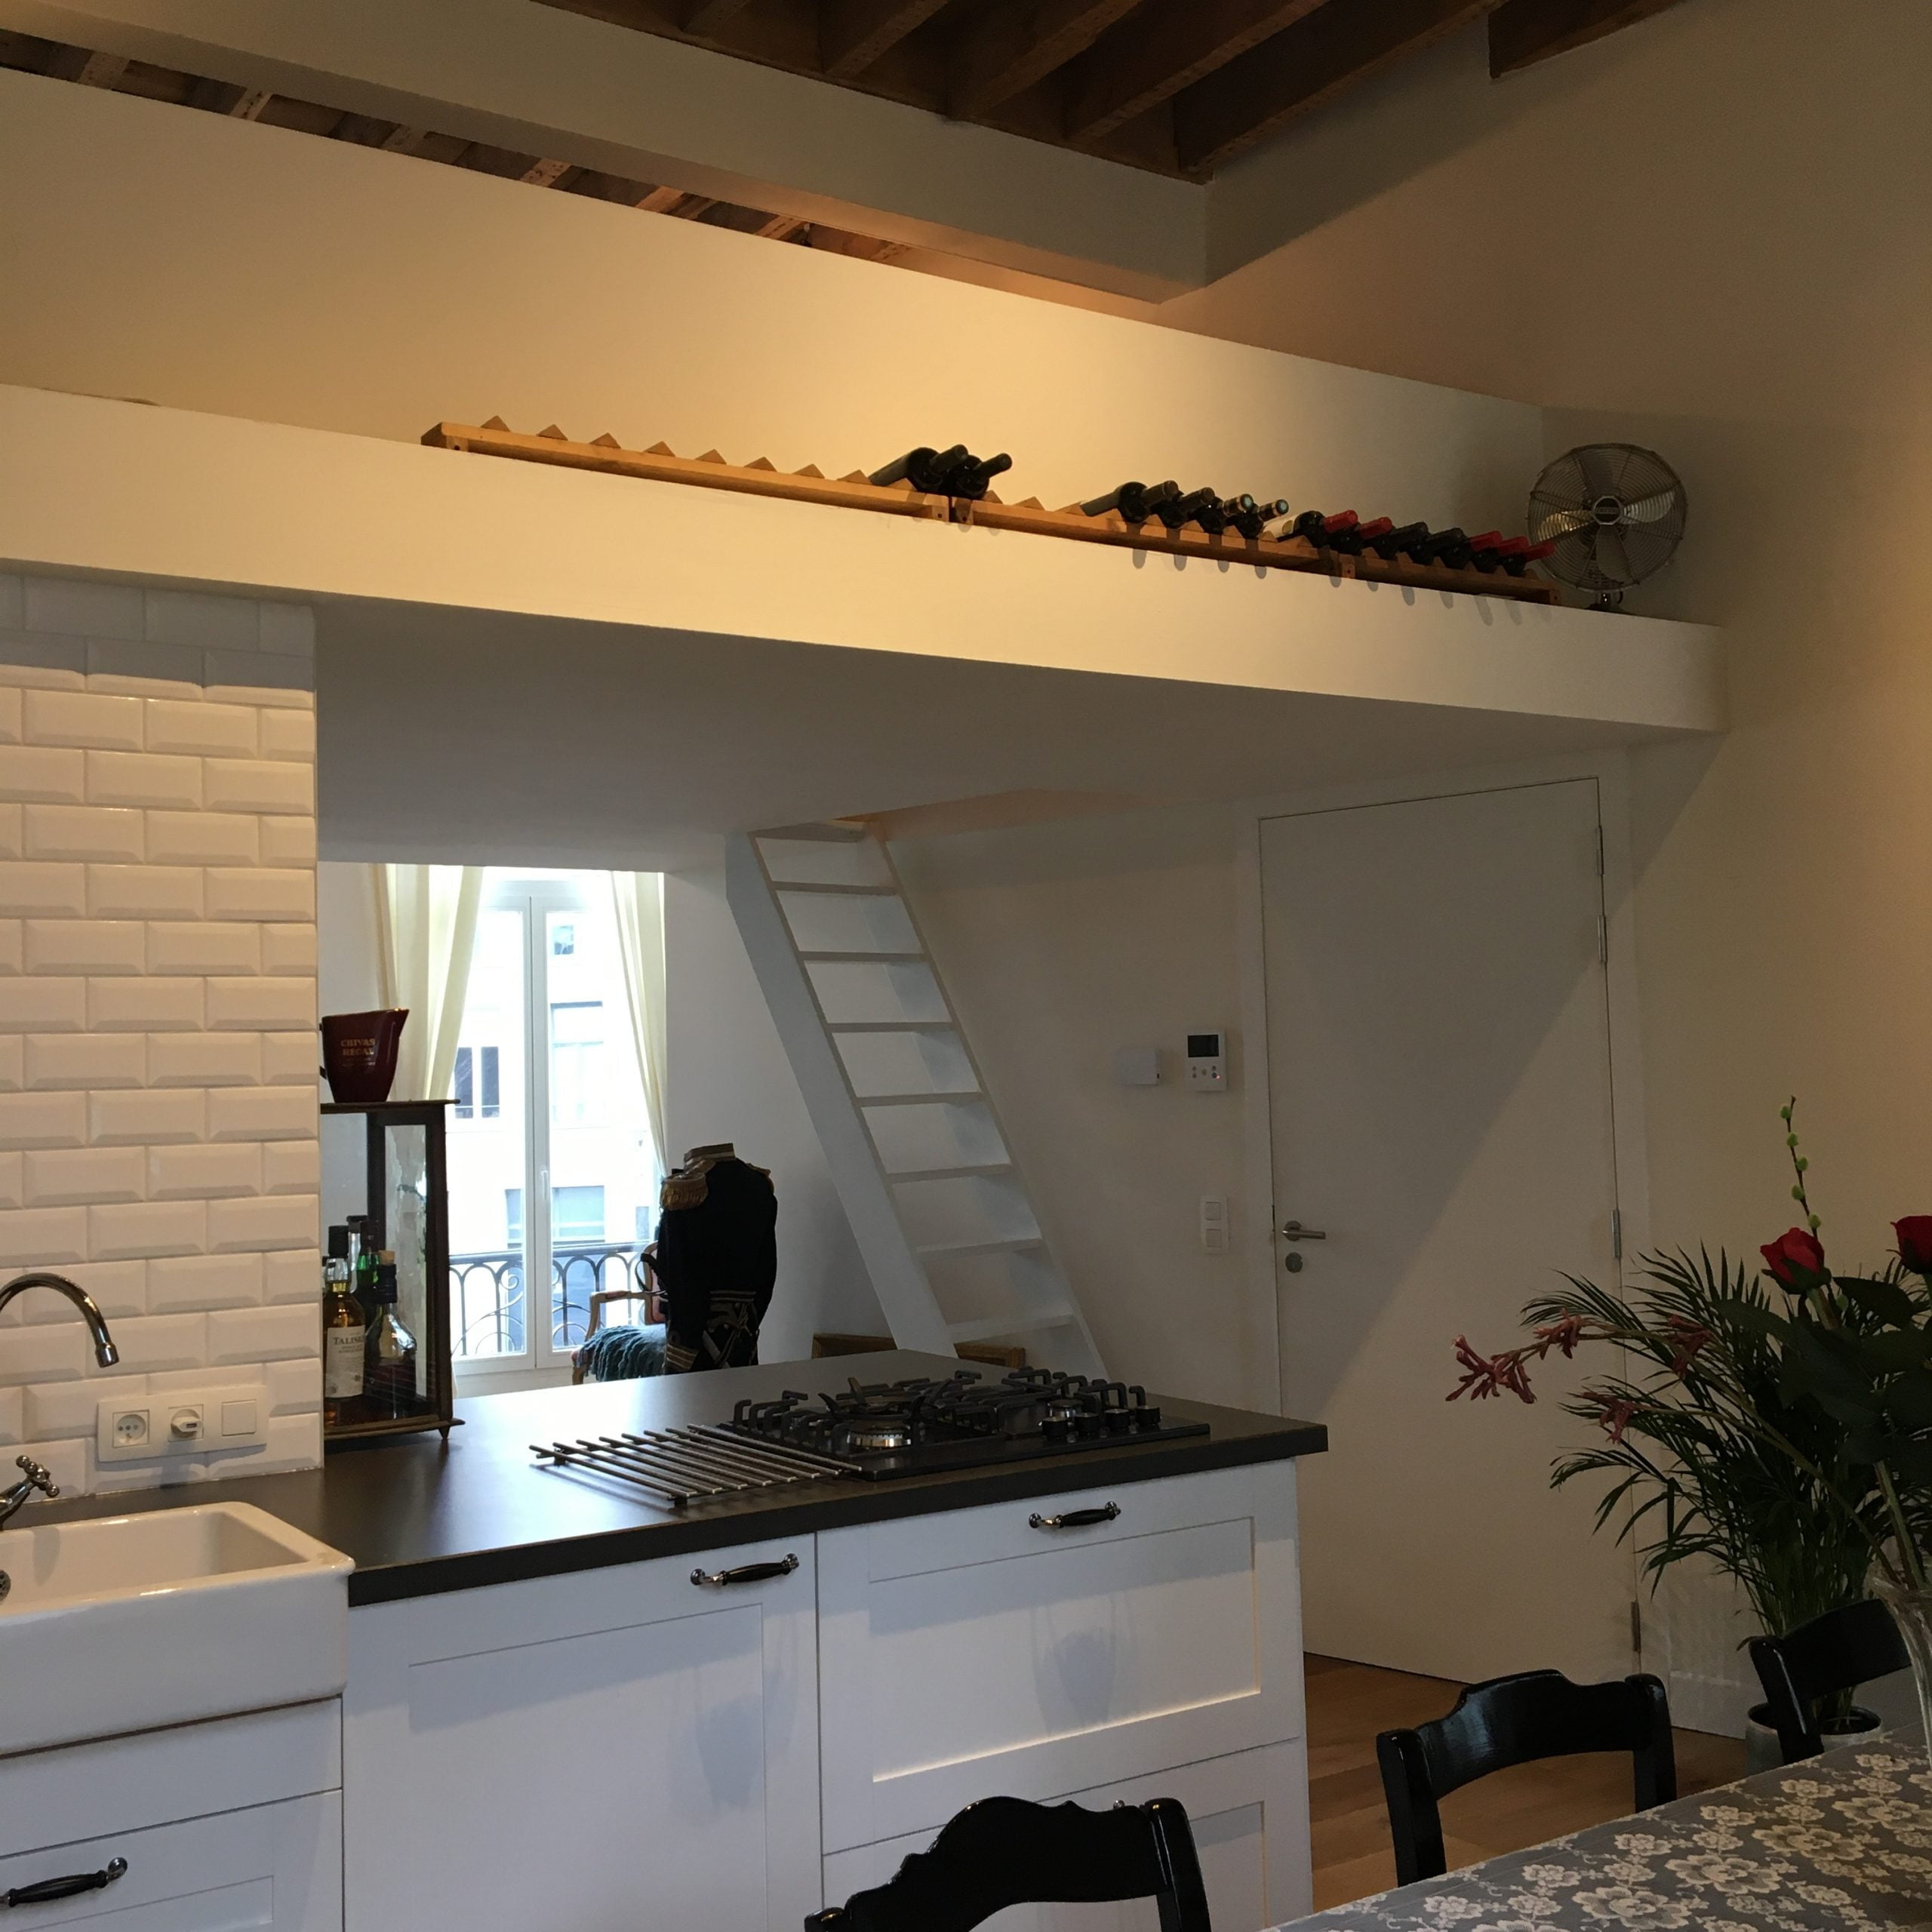 Furnished apartment in Antwerp